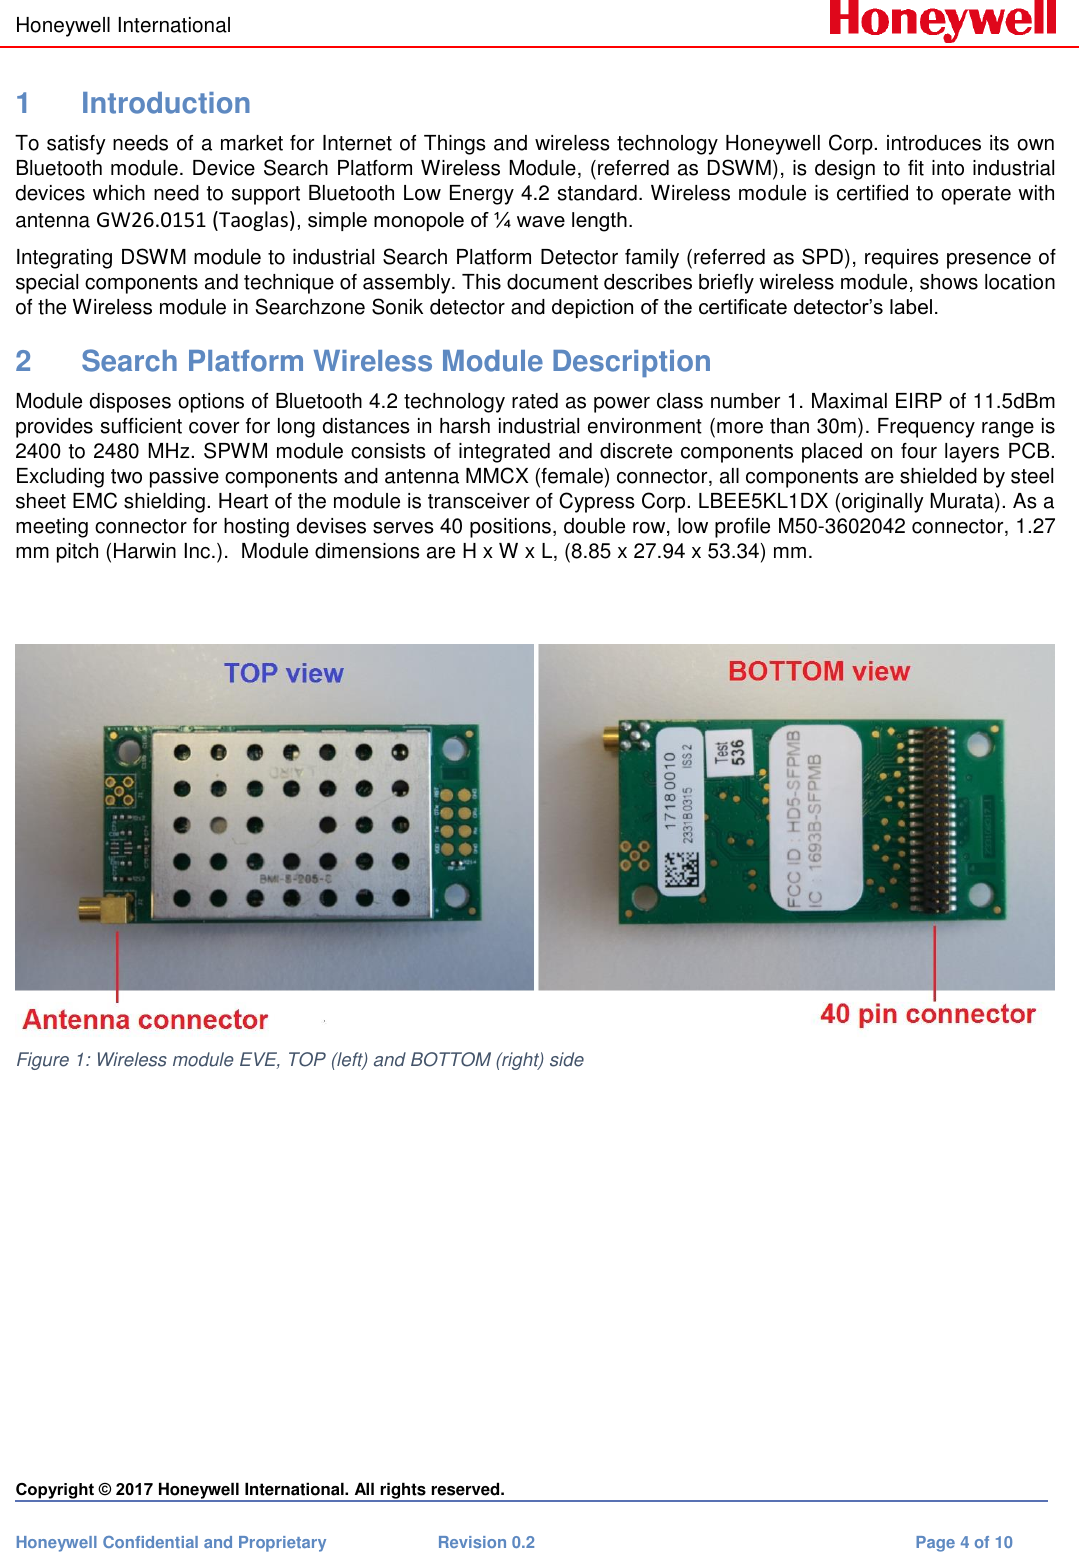 Honeywell International    Copyright © 2017 Honeywell International. All rights reserved. Honeywell Confidential and Proprietary  Revision 0.2  Page 4 of 10  1  Introduction To satisfy needs of a market for Internet of Things and wireless technology Honeywell Corp. introduces its own Bluetooth module. Device Search Platform Wireless Module, (referred as DSWM), is design to fit into industrial devices which need to support Bluetooth Low Energy 4.2 standard. Wireless module is certified to operate with antenna GW26.0151 (Taoglas), simple monopole of ¼ wave length.  Integrating DSWM module to industrial Search Platform Detector family (referred as SPD), requires presence of special components and technique of assembly. This document describes briefly wireless module, shows location of the Wireless module in Searchzone Sonik detector and depiction of the certificate detector’s label. 2  Search Platform Wireless Module Description Module disposes options of Bluetooth 4.2 technology rated as power class number 1. Maximal EIRP of 11.5dBm provides sufficient cover for long distances in harsh industrial environment (more than 30m). Frequency range is 2400 to 2480 MHz. SPWM module consists of integrated and discrete components placed on four layers PCB. Excluding two passive components and antenna MMCX (female) connector, all components are shielded by steel sheet EMC shielding. Heart of the module is transceiver of Cypress Corp. LBEE5KL1DX (originally Murata). As a meeting connector for hosting devises serves 40 positions, double row, low profile M50-3602042 connector, 1.27 mm pitch (Harwin Inc.).  Module dimensions are H x W x L, (8.85 x 27.94 x 53.34) mm.     Figure 1: Wireless module EVE, TOP (left) and BOTTOM (right) side           